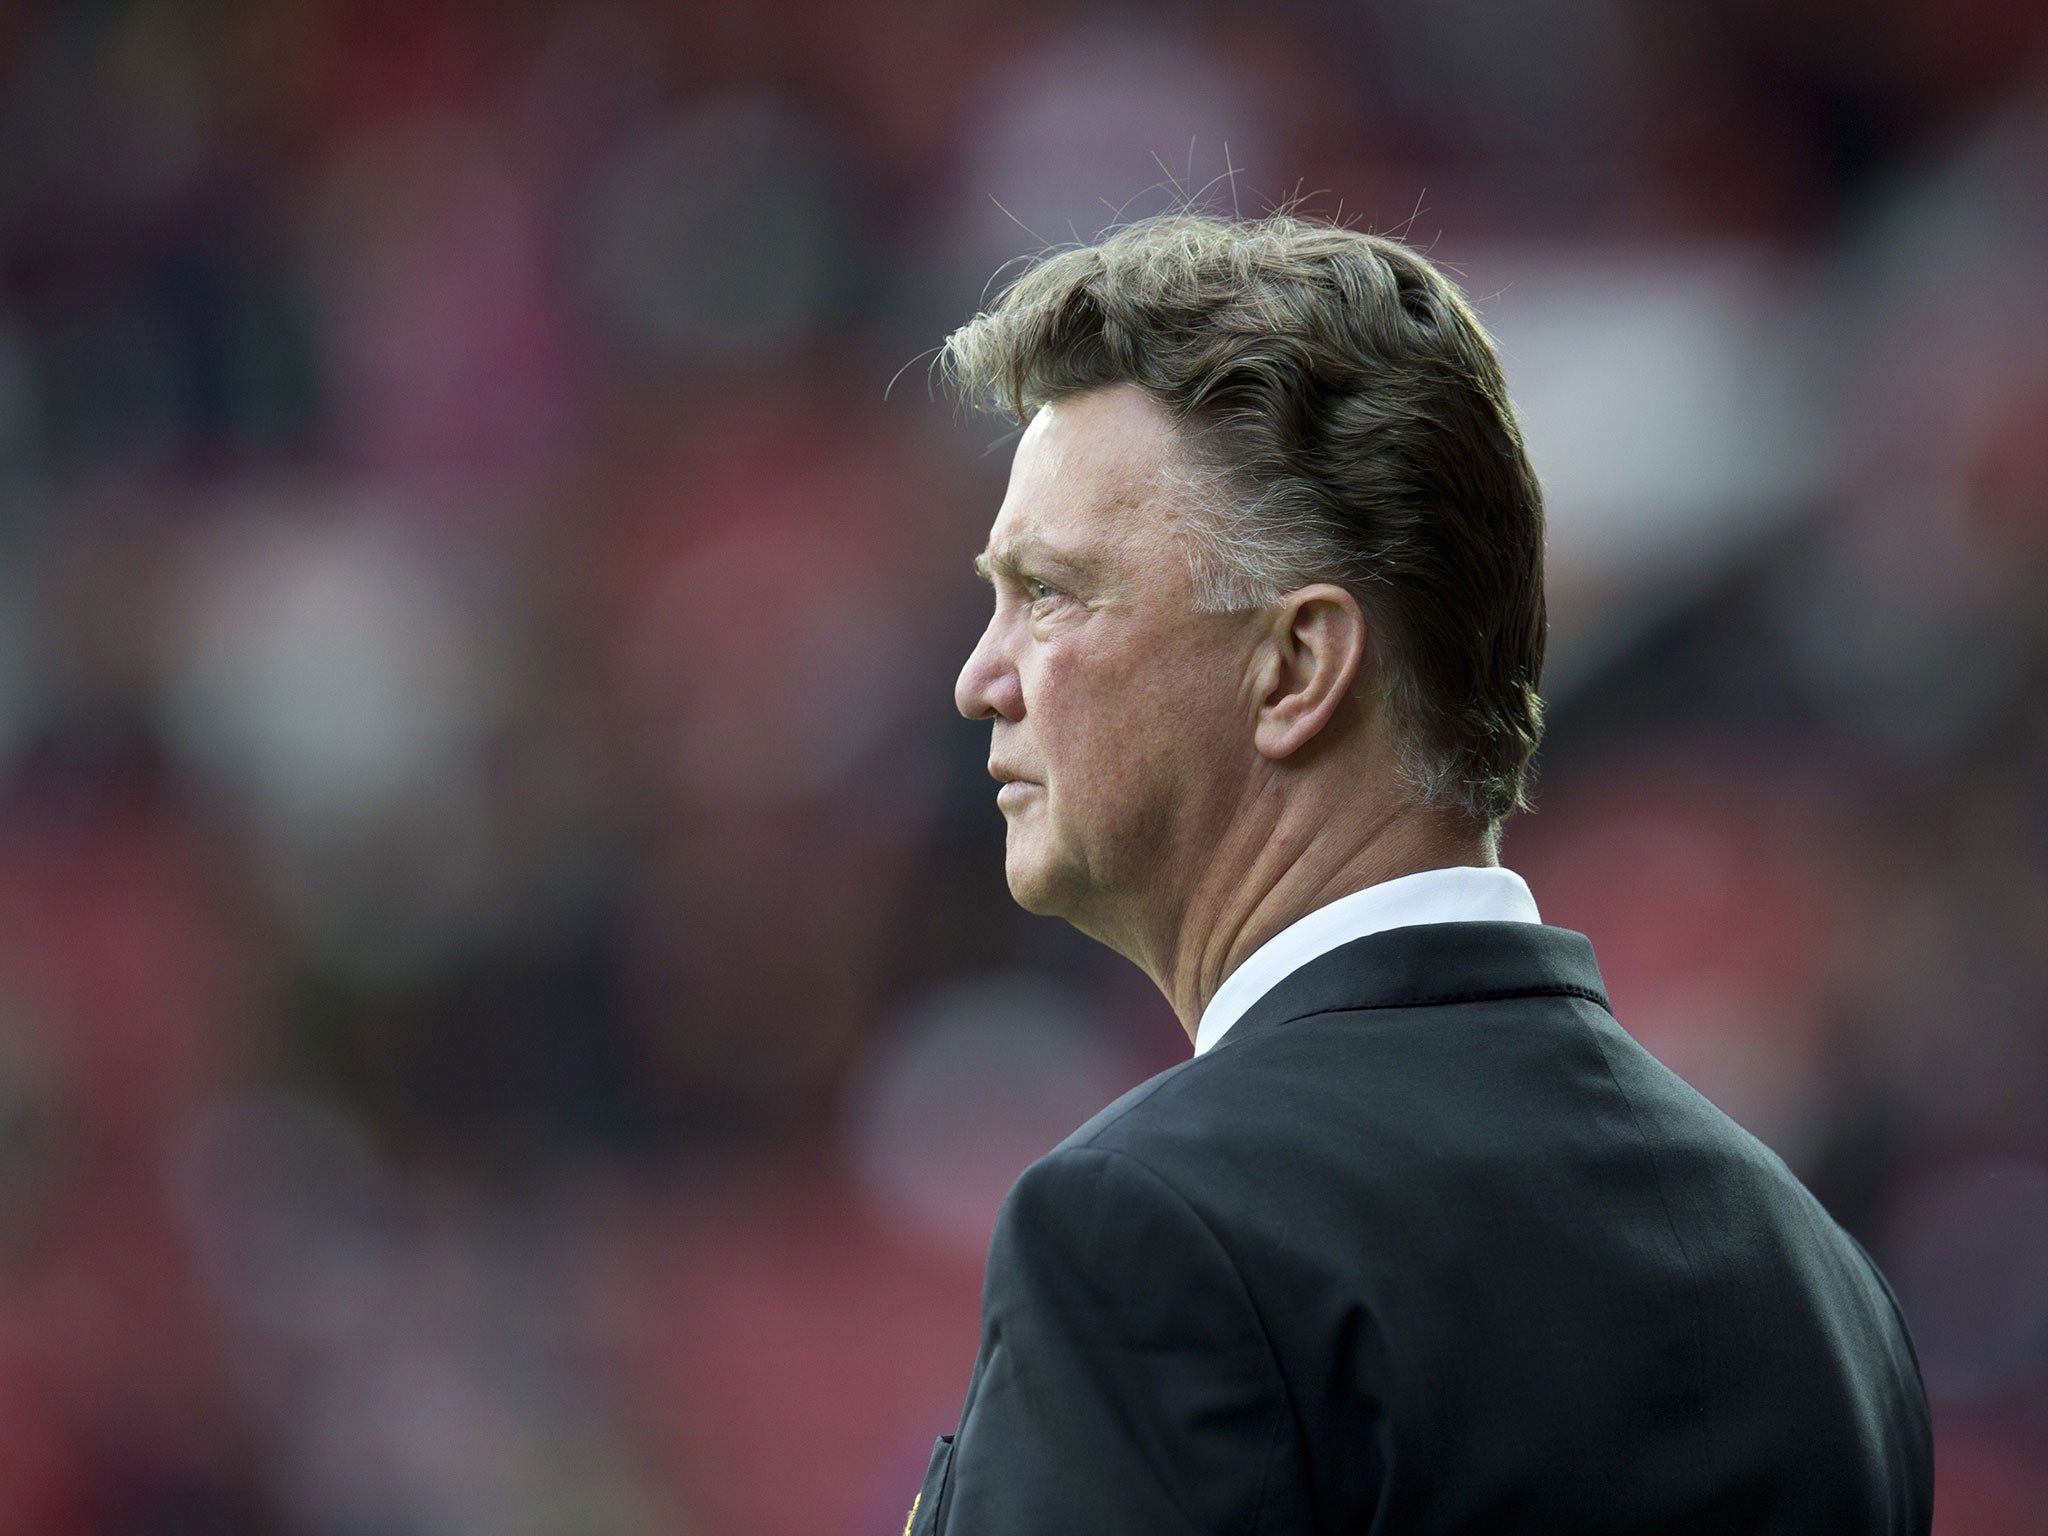 Louis van Gaal looks on from the touchline